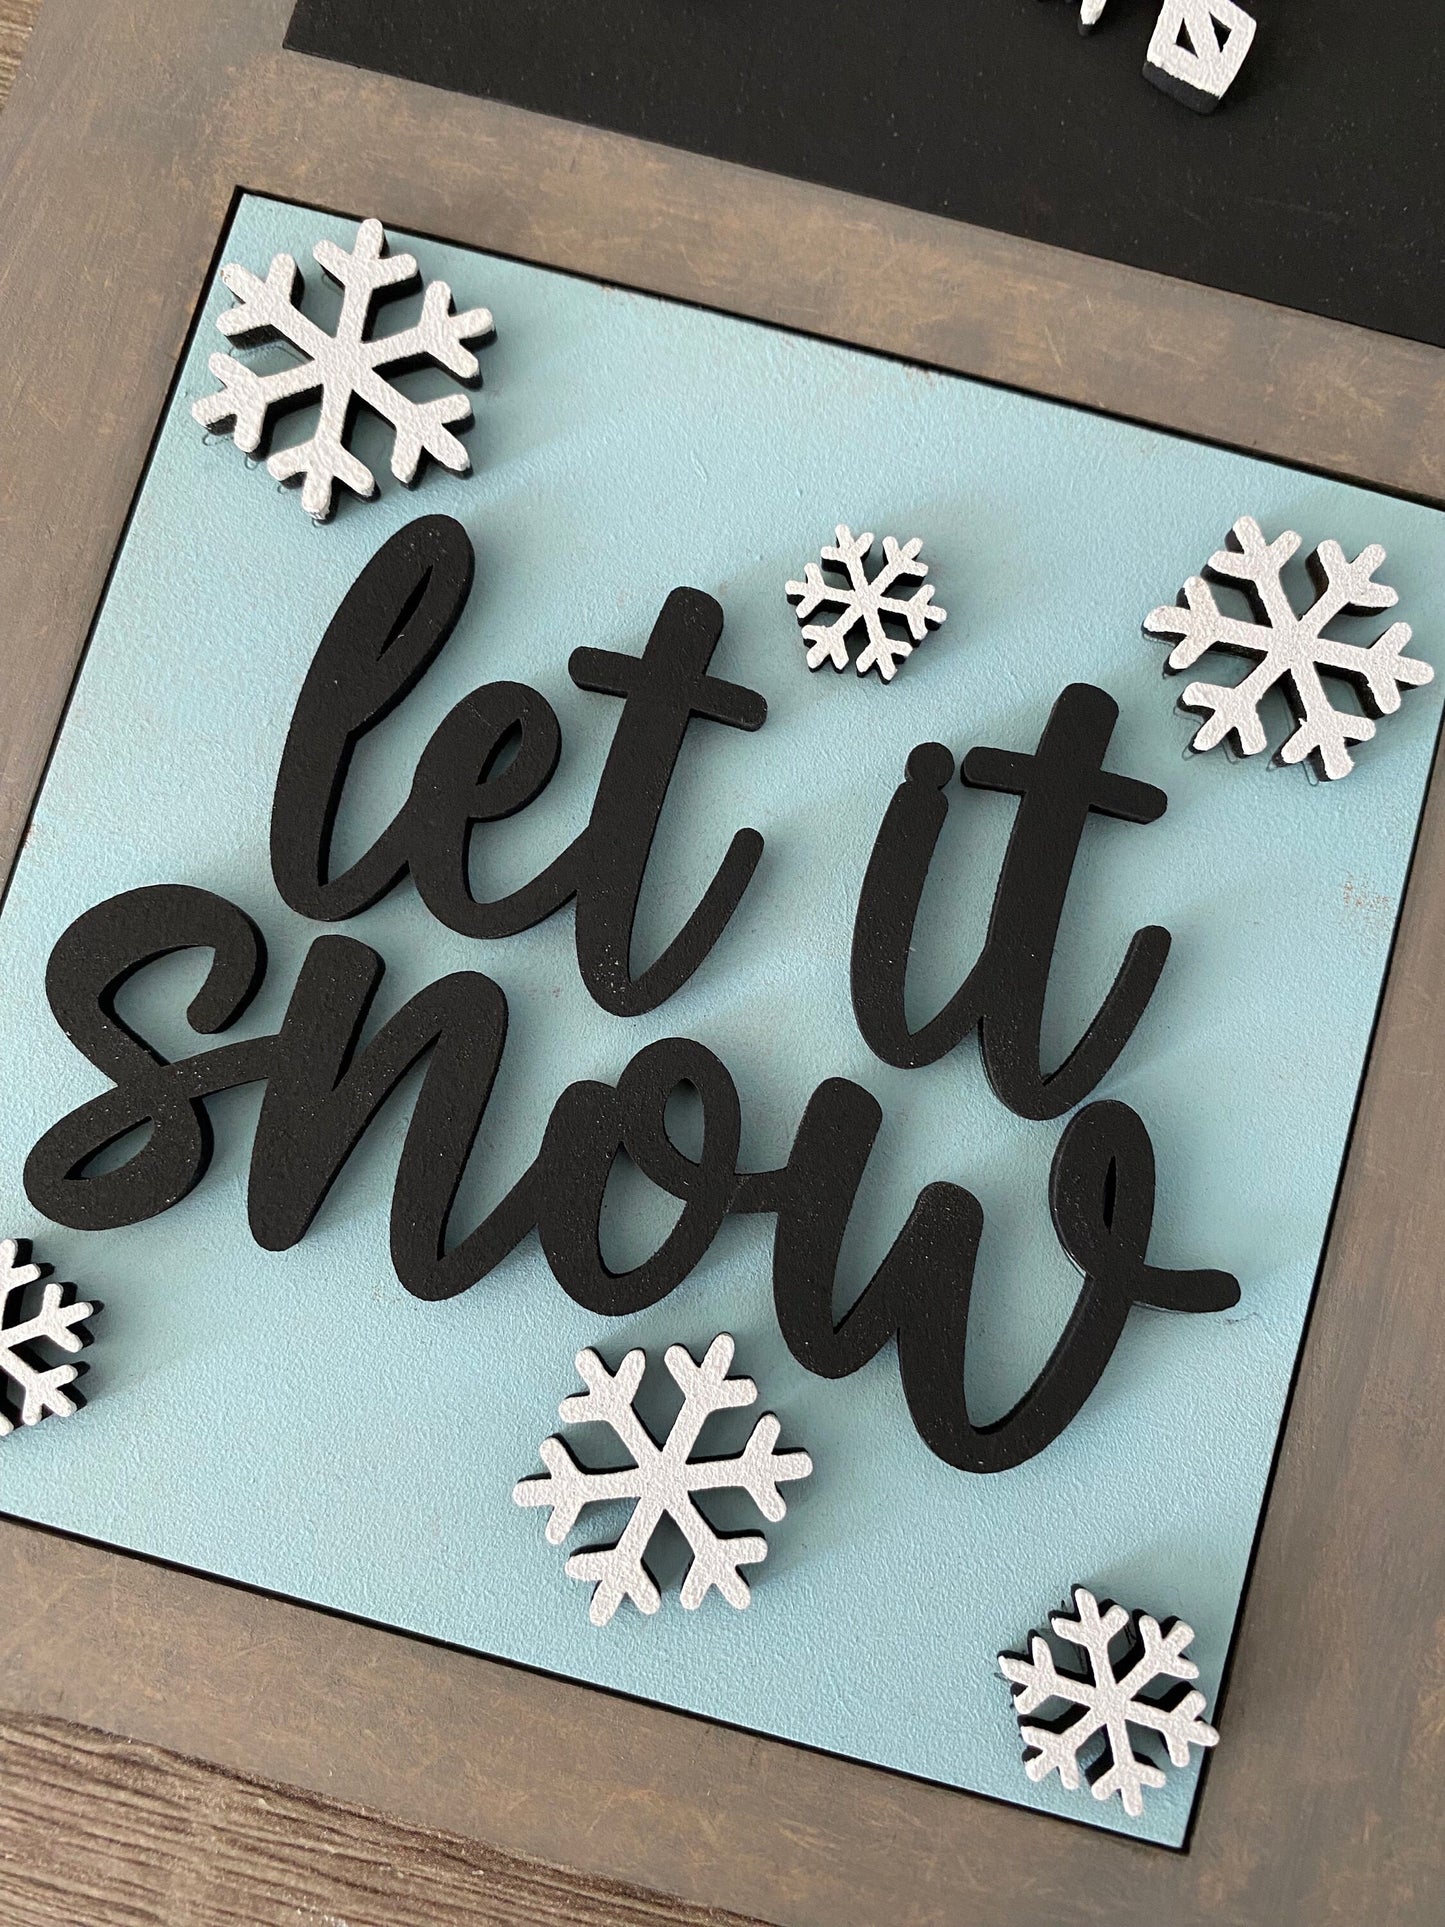 Let it Snow Winter Wonderland | Snowman Snowflake Interchangeable Tile Inserts for Leaning Ladder and Home Décor Sign